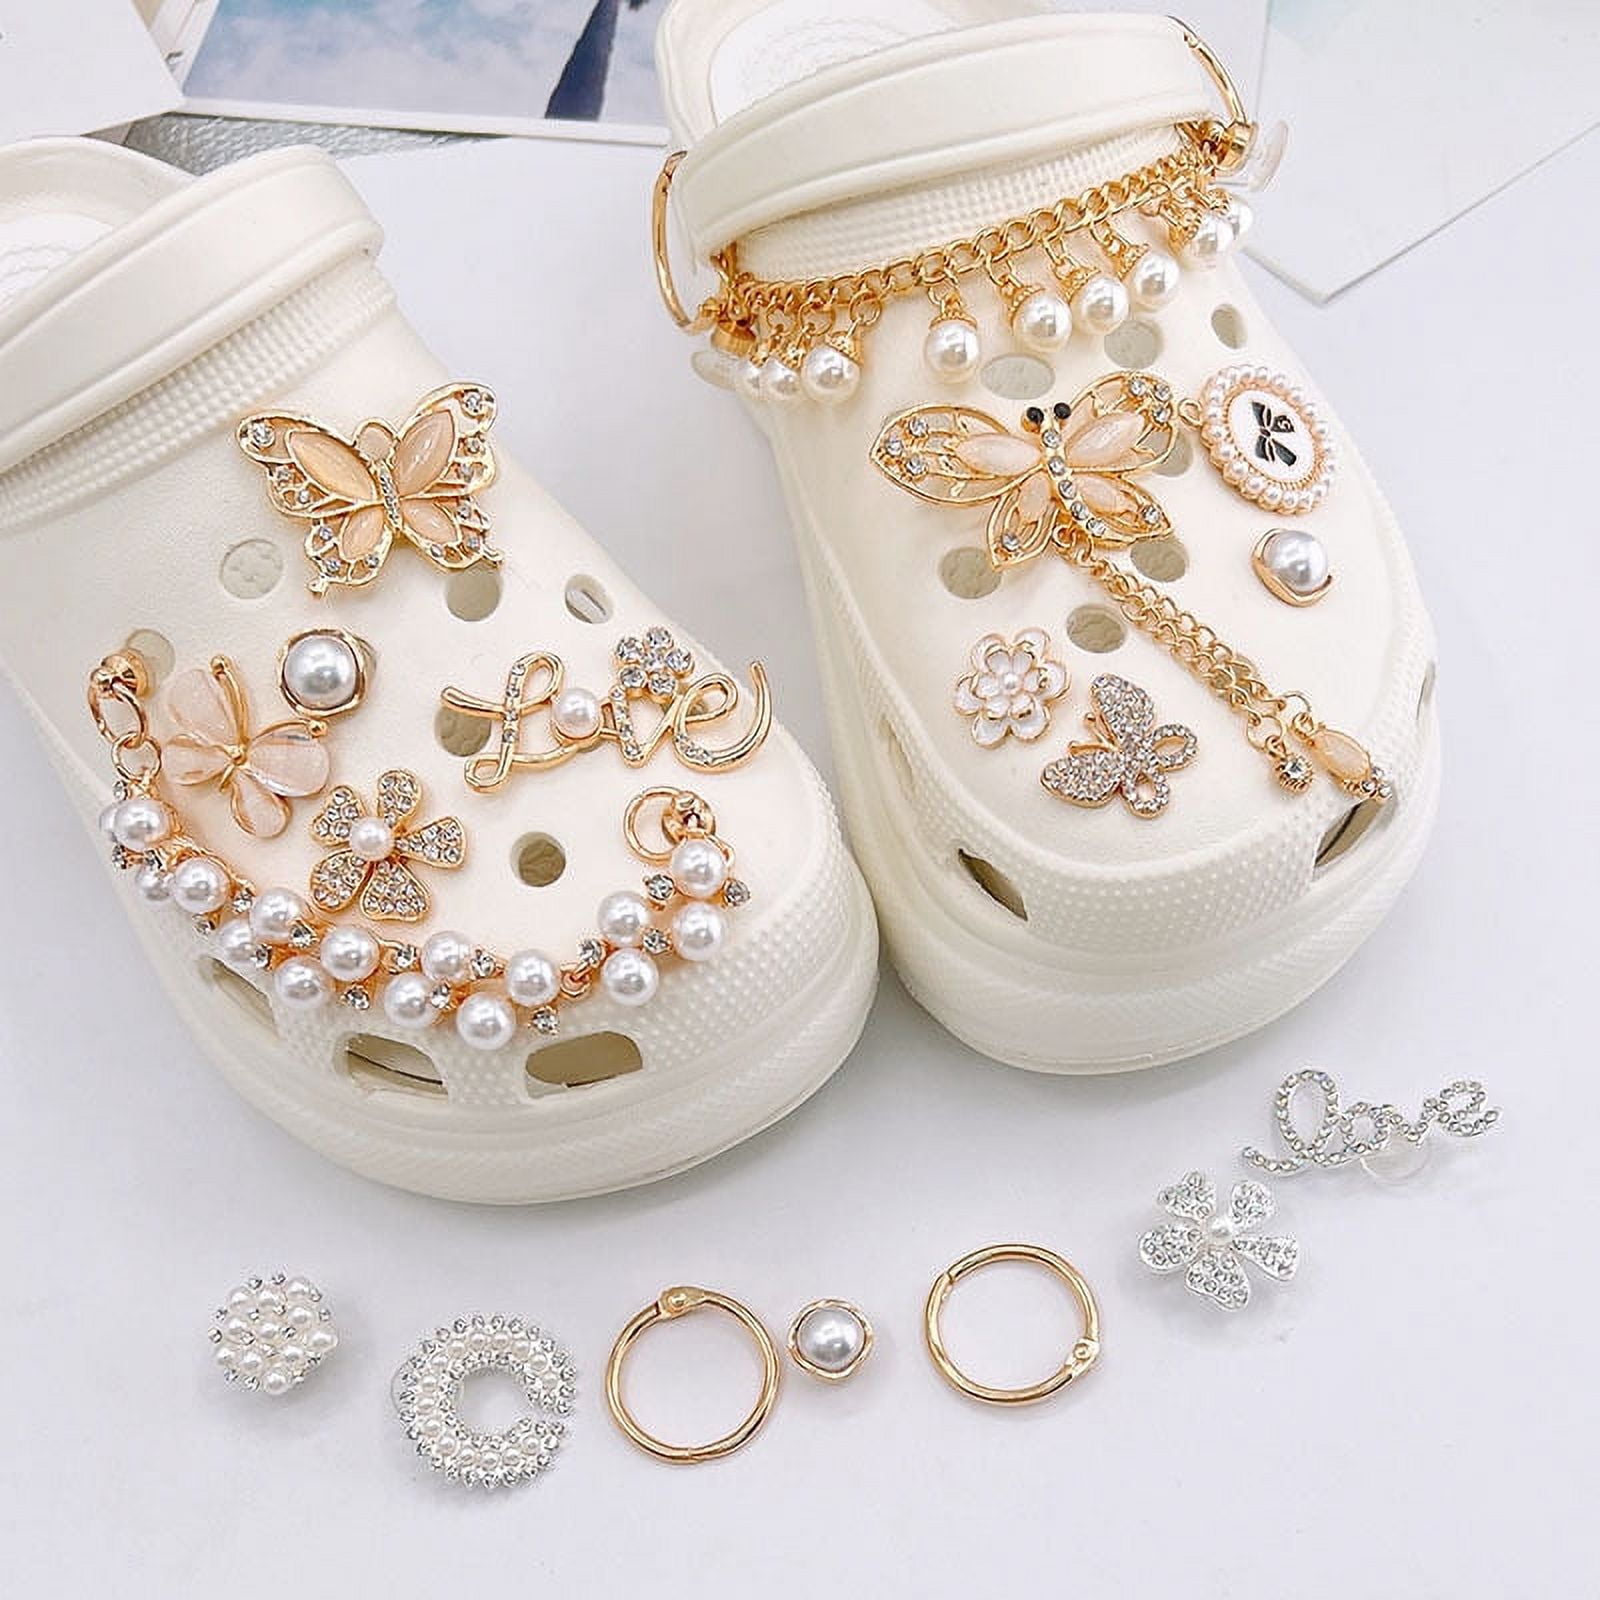 2023 Hot Sale 1 Set Women's Sandals New Designer Croc Charms Gemstone Cool  Kwaii Shoe Decorations Pearl Metal Accessories New